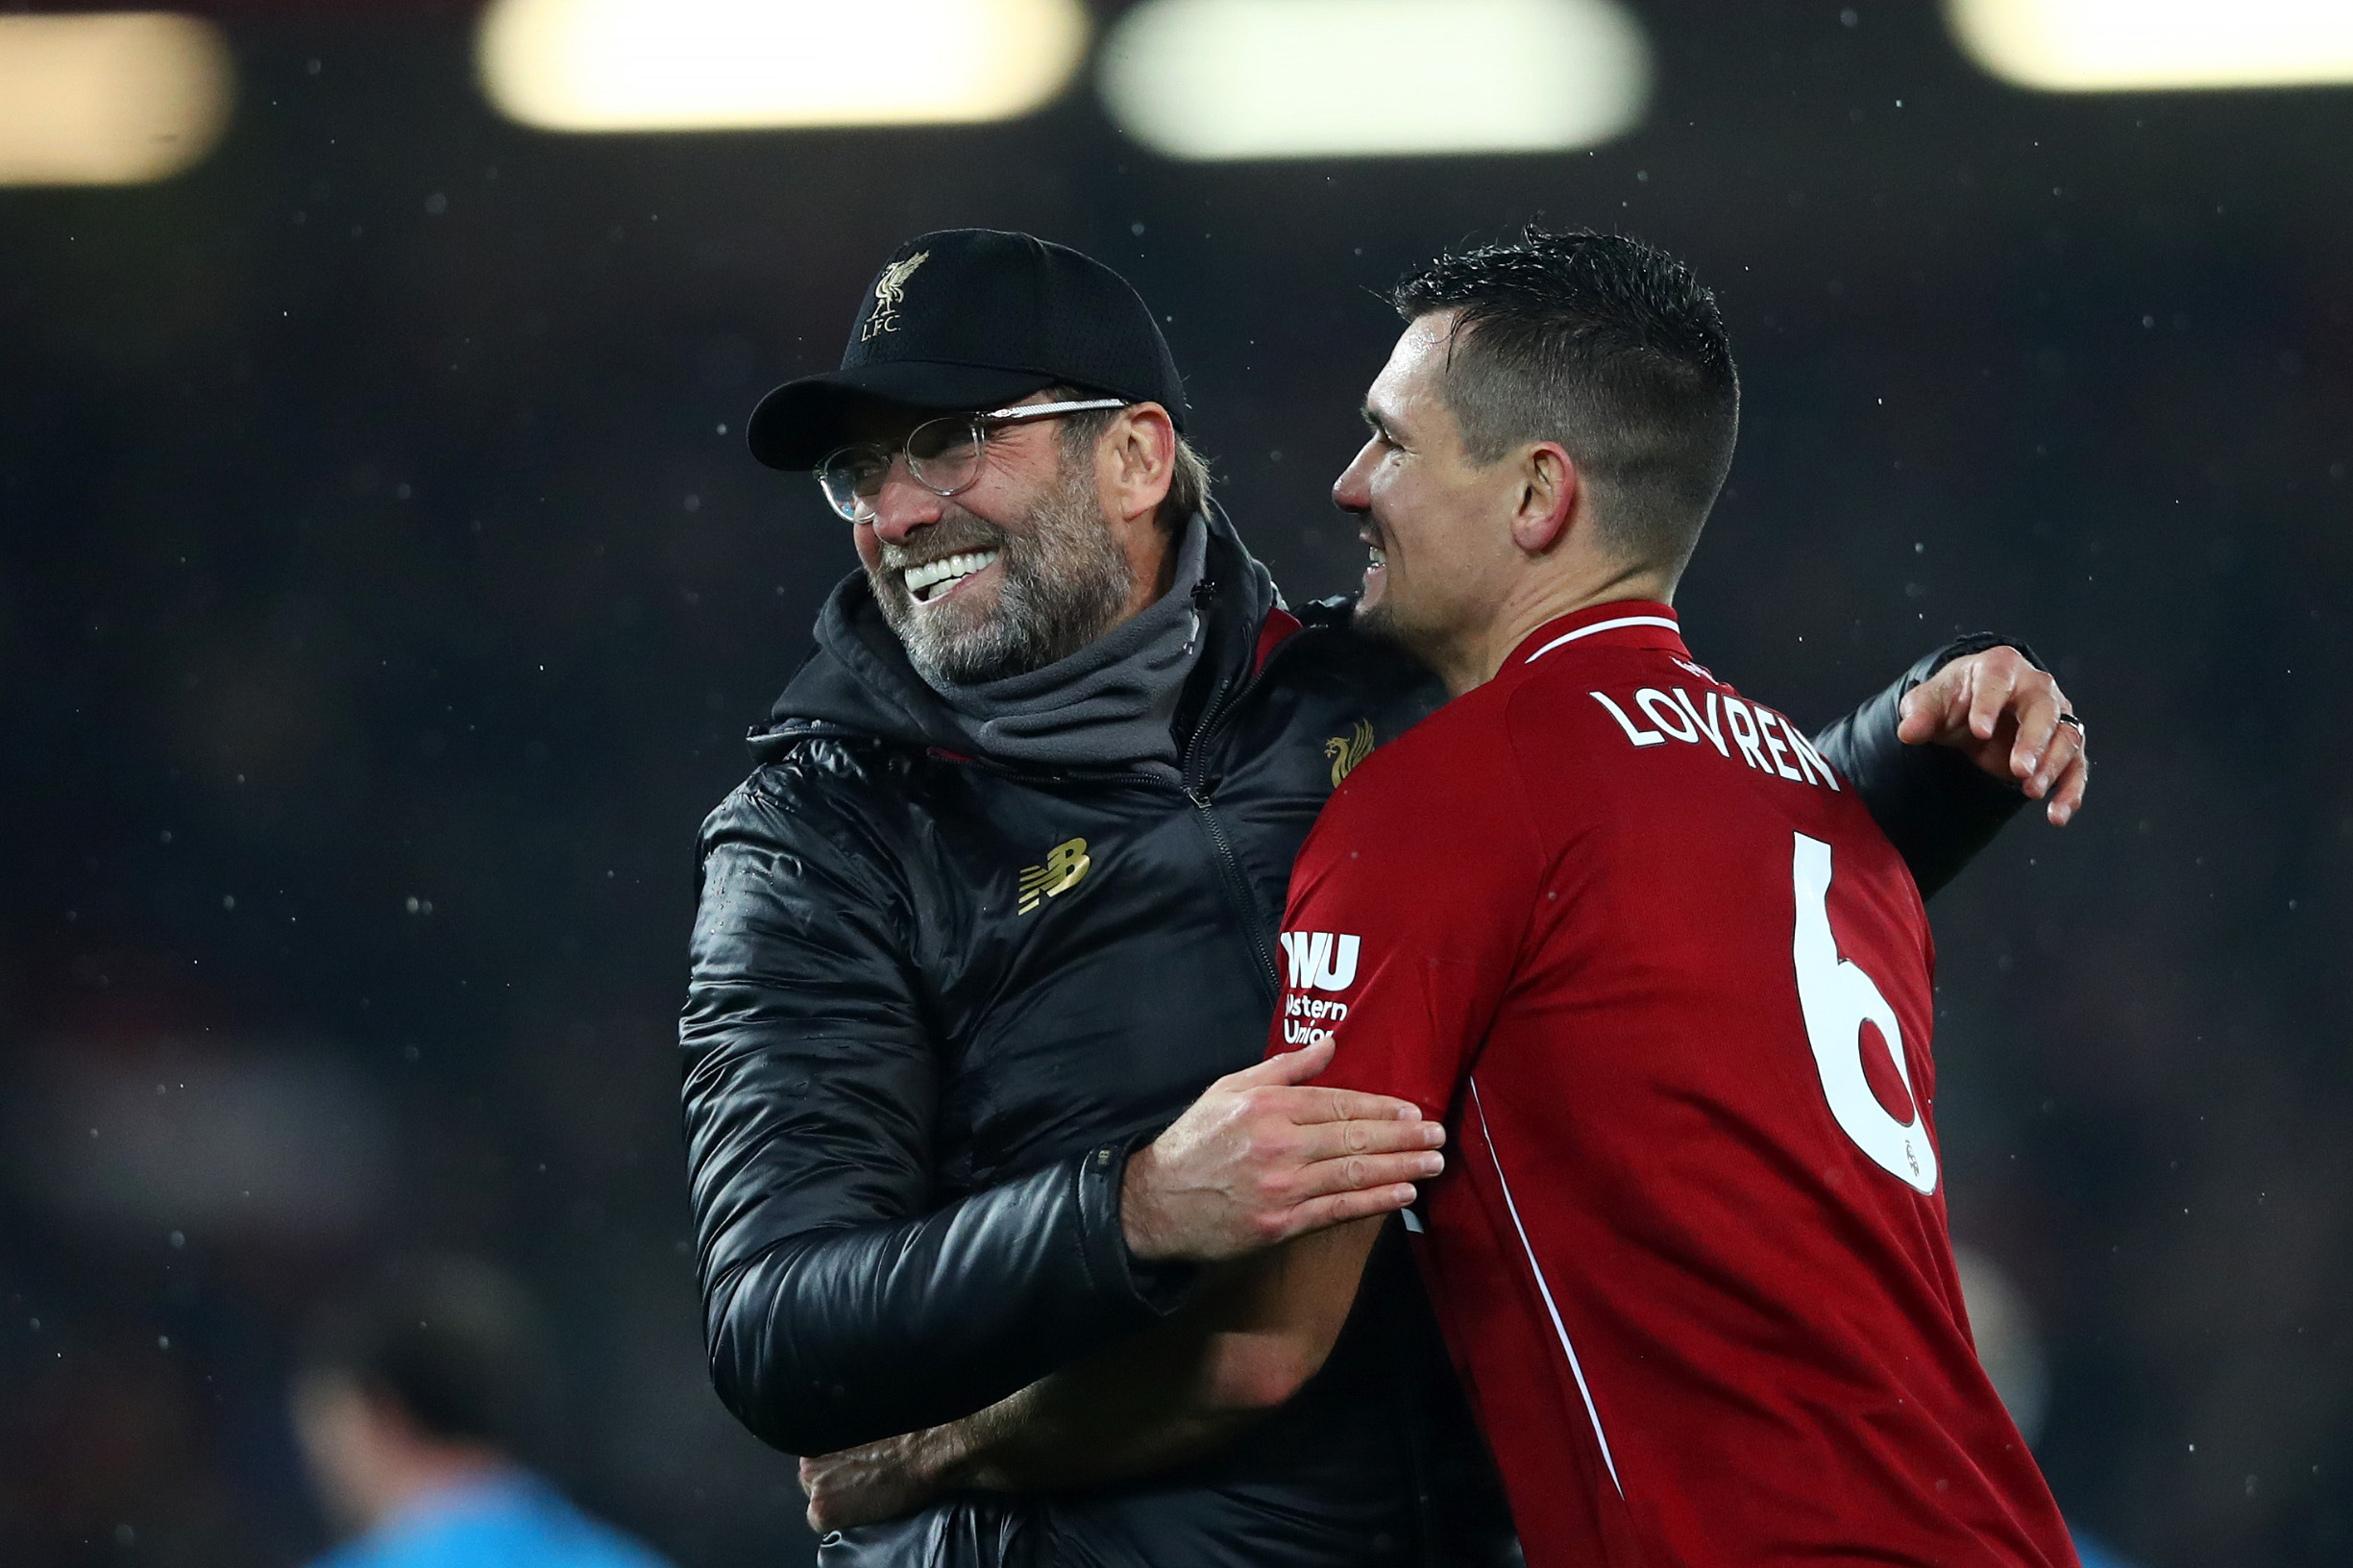 LIVERPOOL, ENGLAND - DECEMBER 16:  Jurgen Klopp, Manager of Liverpool and Dejan Lovren of Liverpool celebrate following their sides victory in the Premier League match between Liverpool FC and Manchester United at Anfield on December 16, 2018 in Liverpool, United Kingdom.  (Photo by Clive Brunskill/Getty Images)